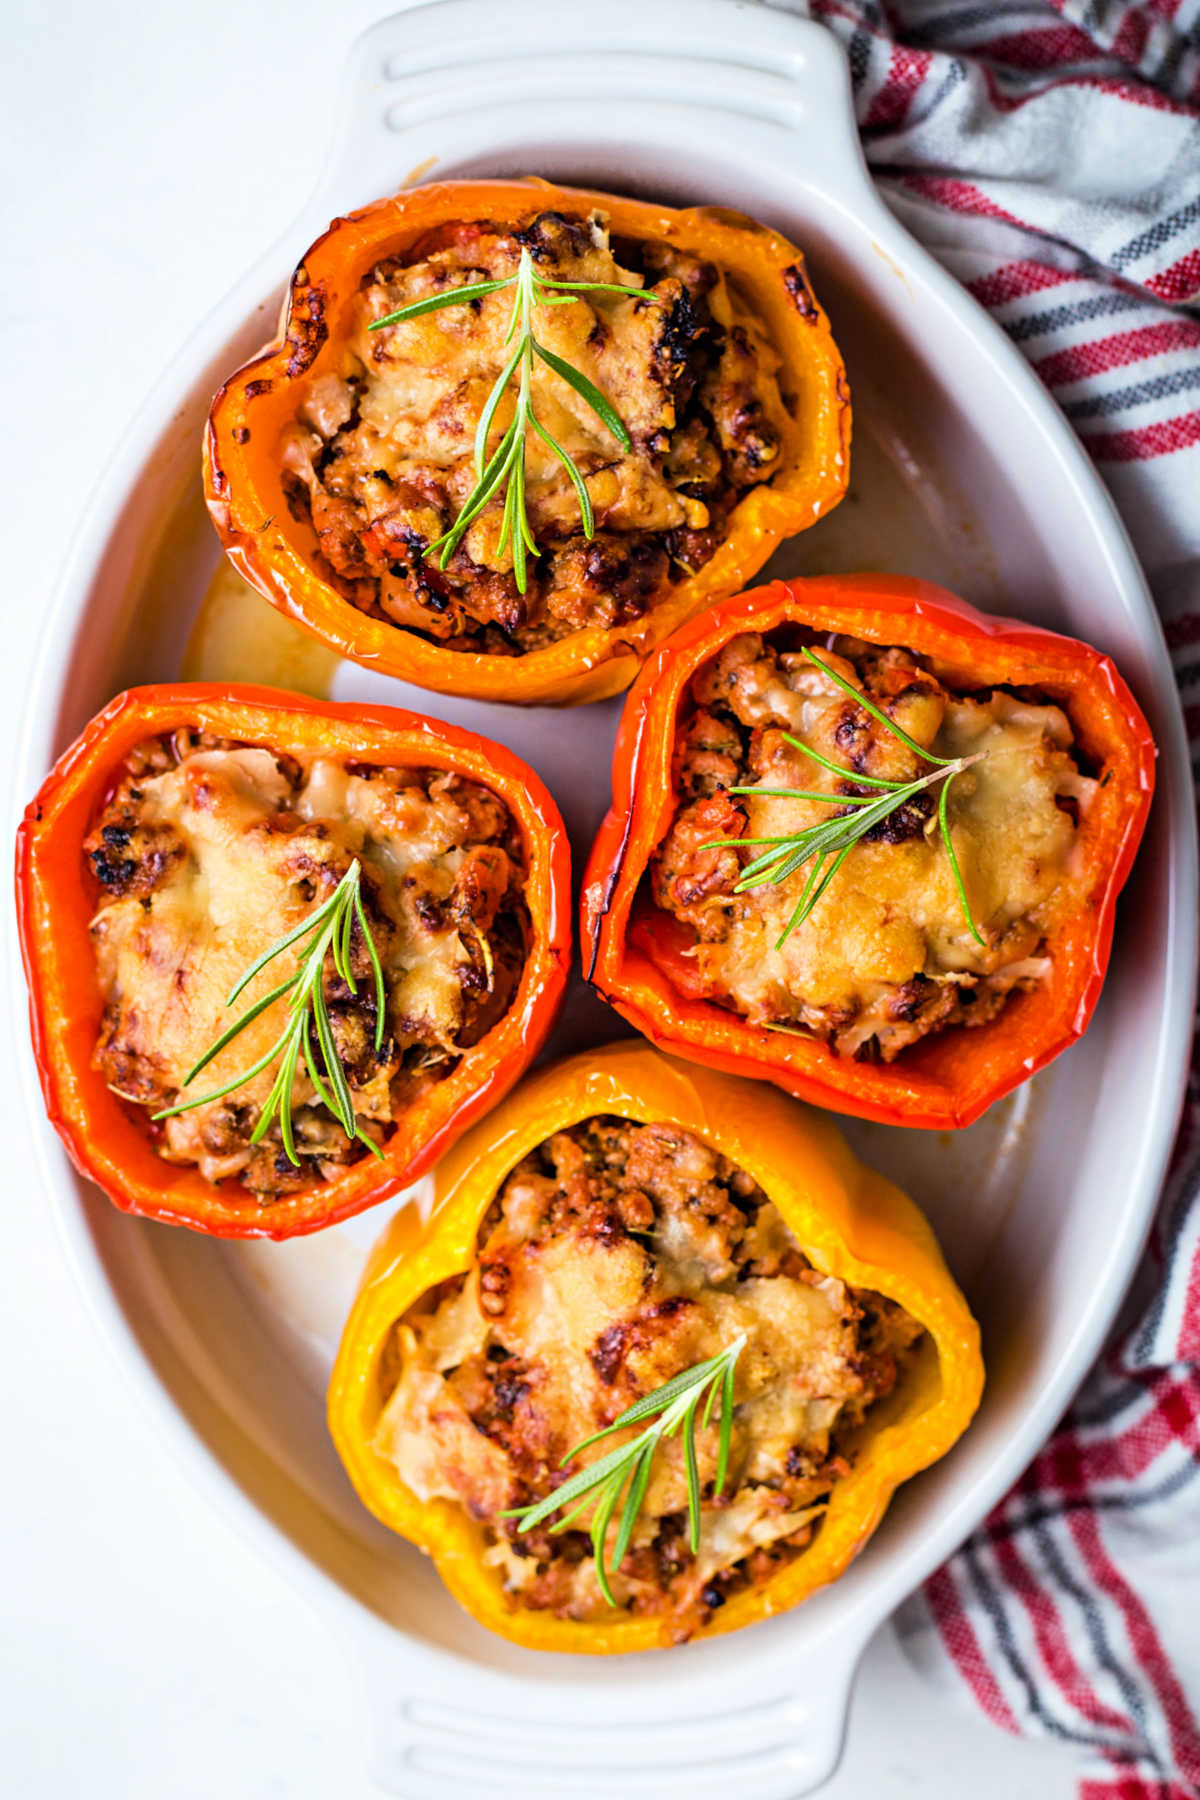 four saucy turkey stuffed peppers in a white baking dish on a table.